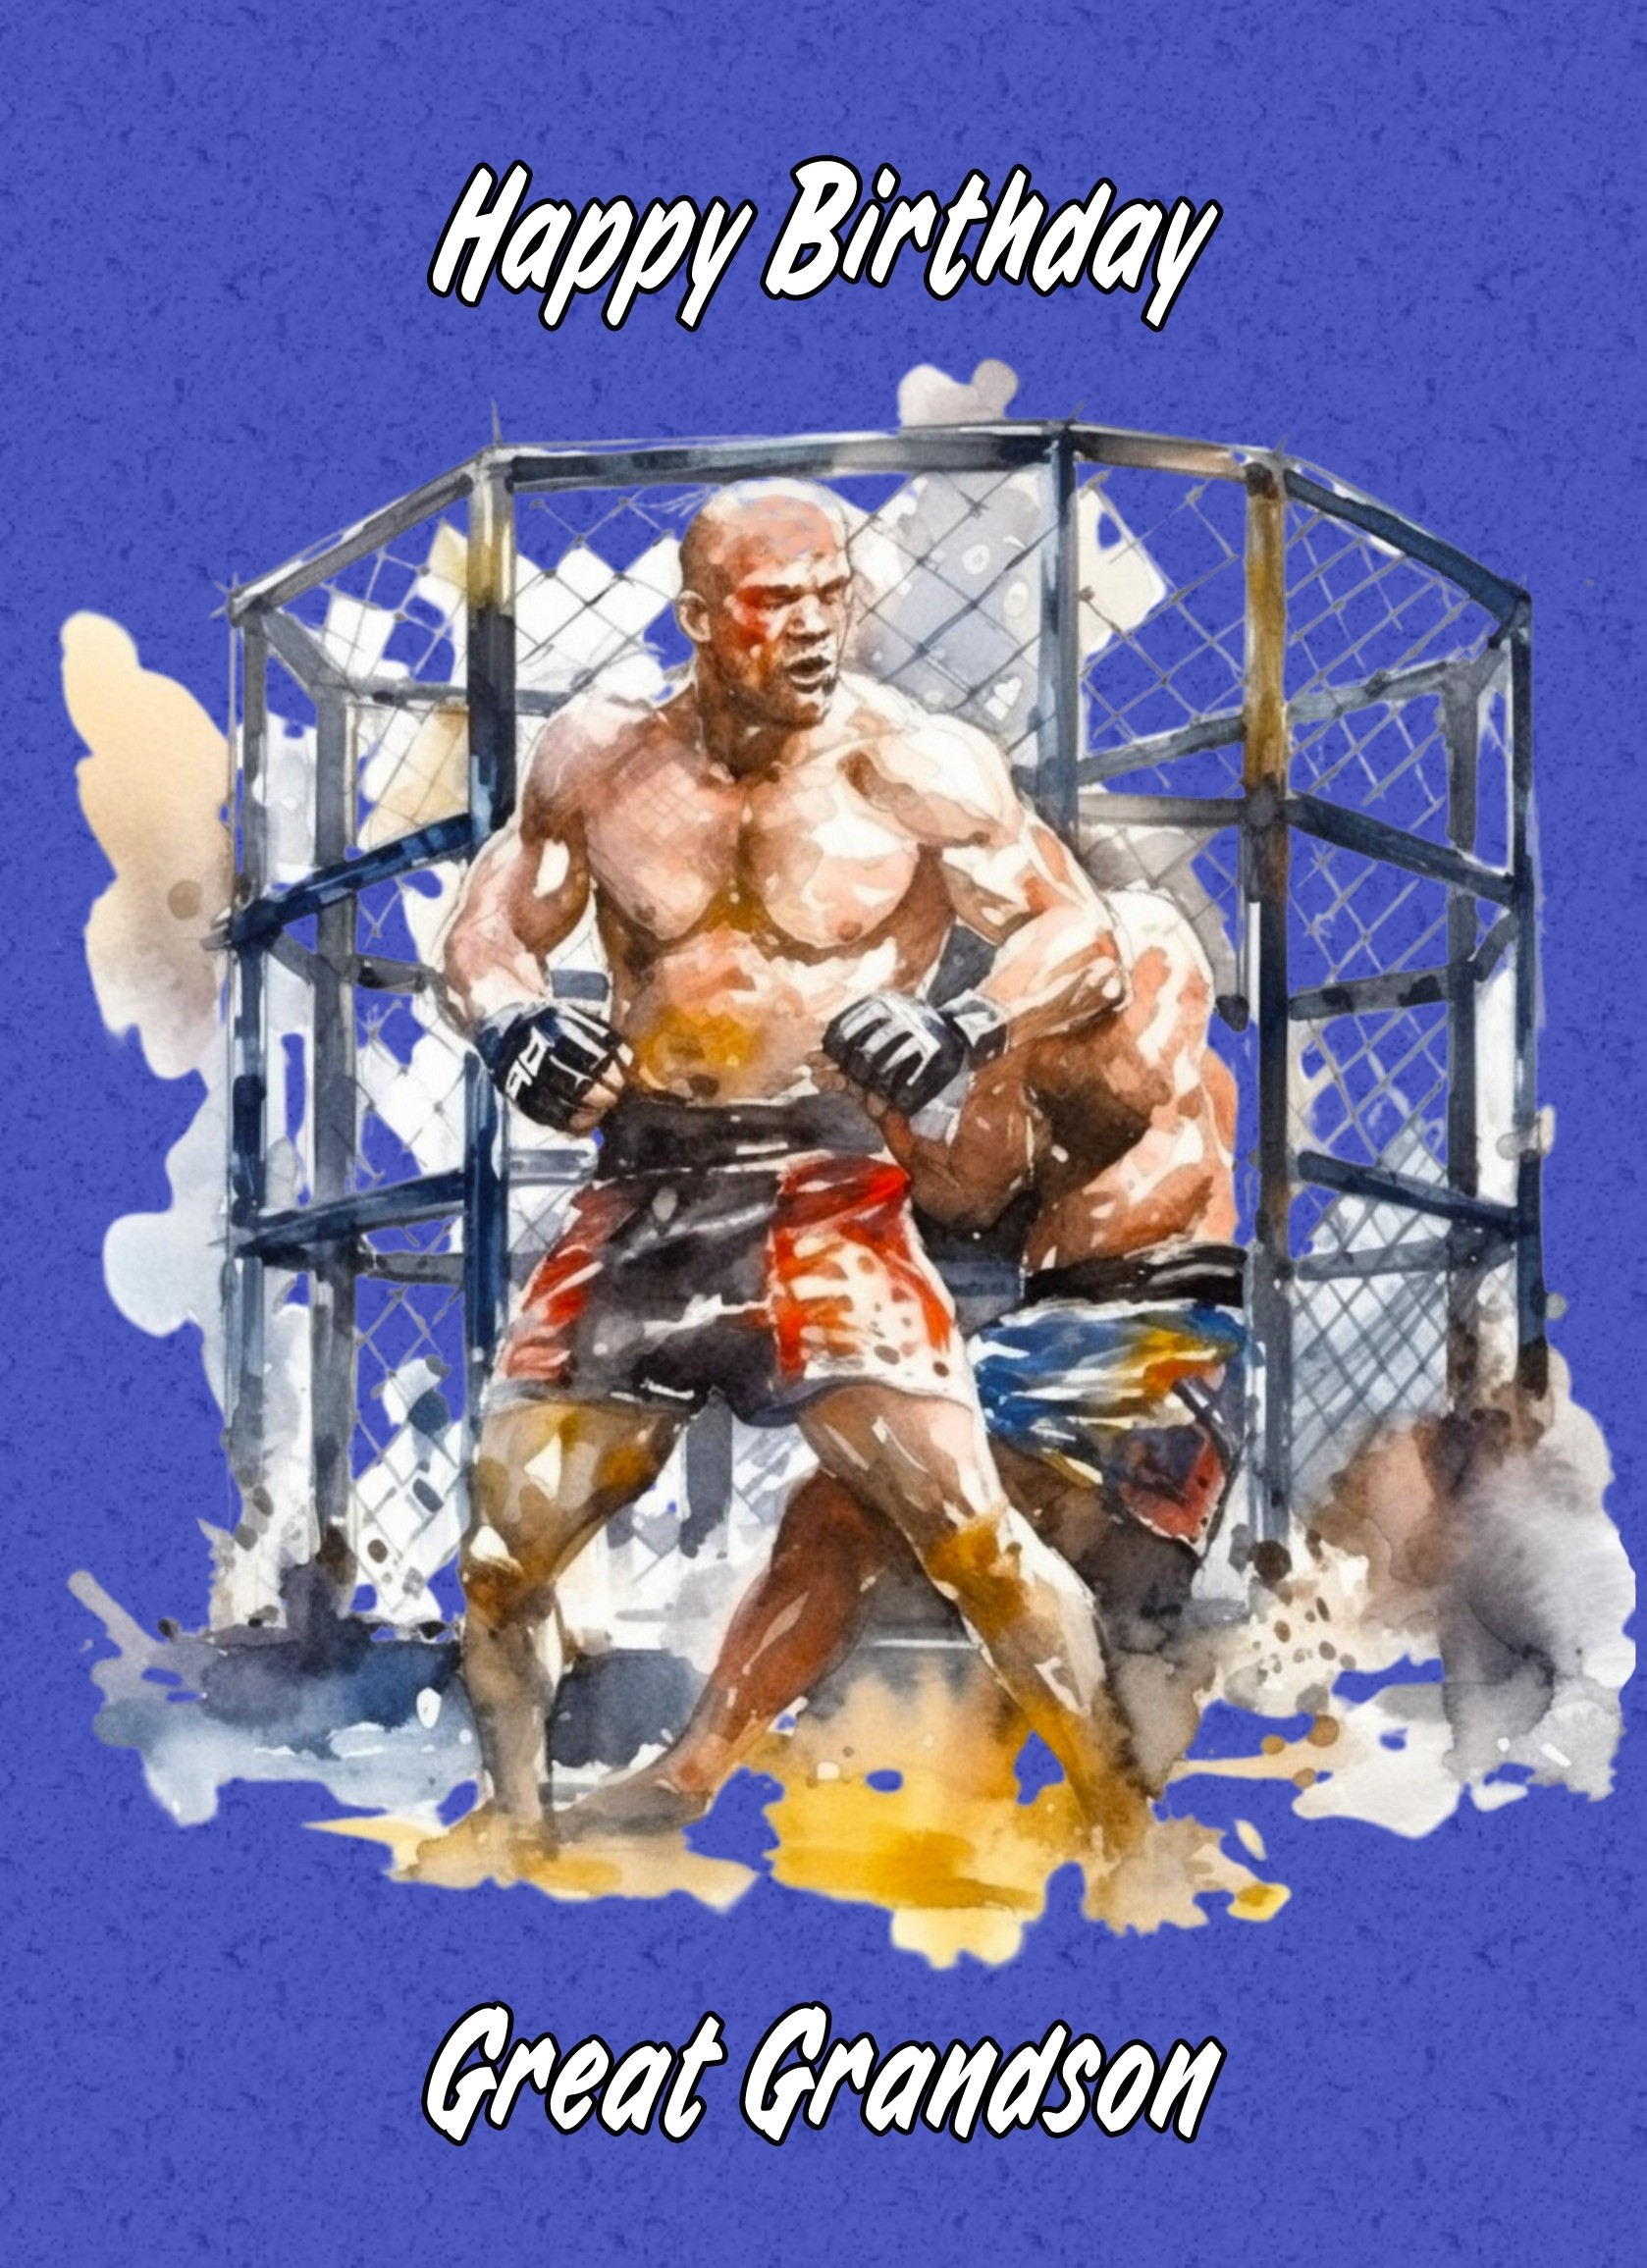 Mixed Martial Arts Birthday Card for Great Grandson (MMA, Design 1)